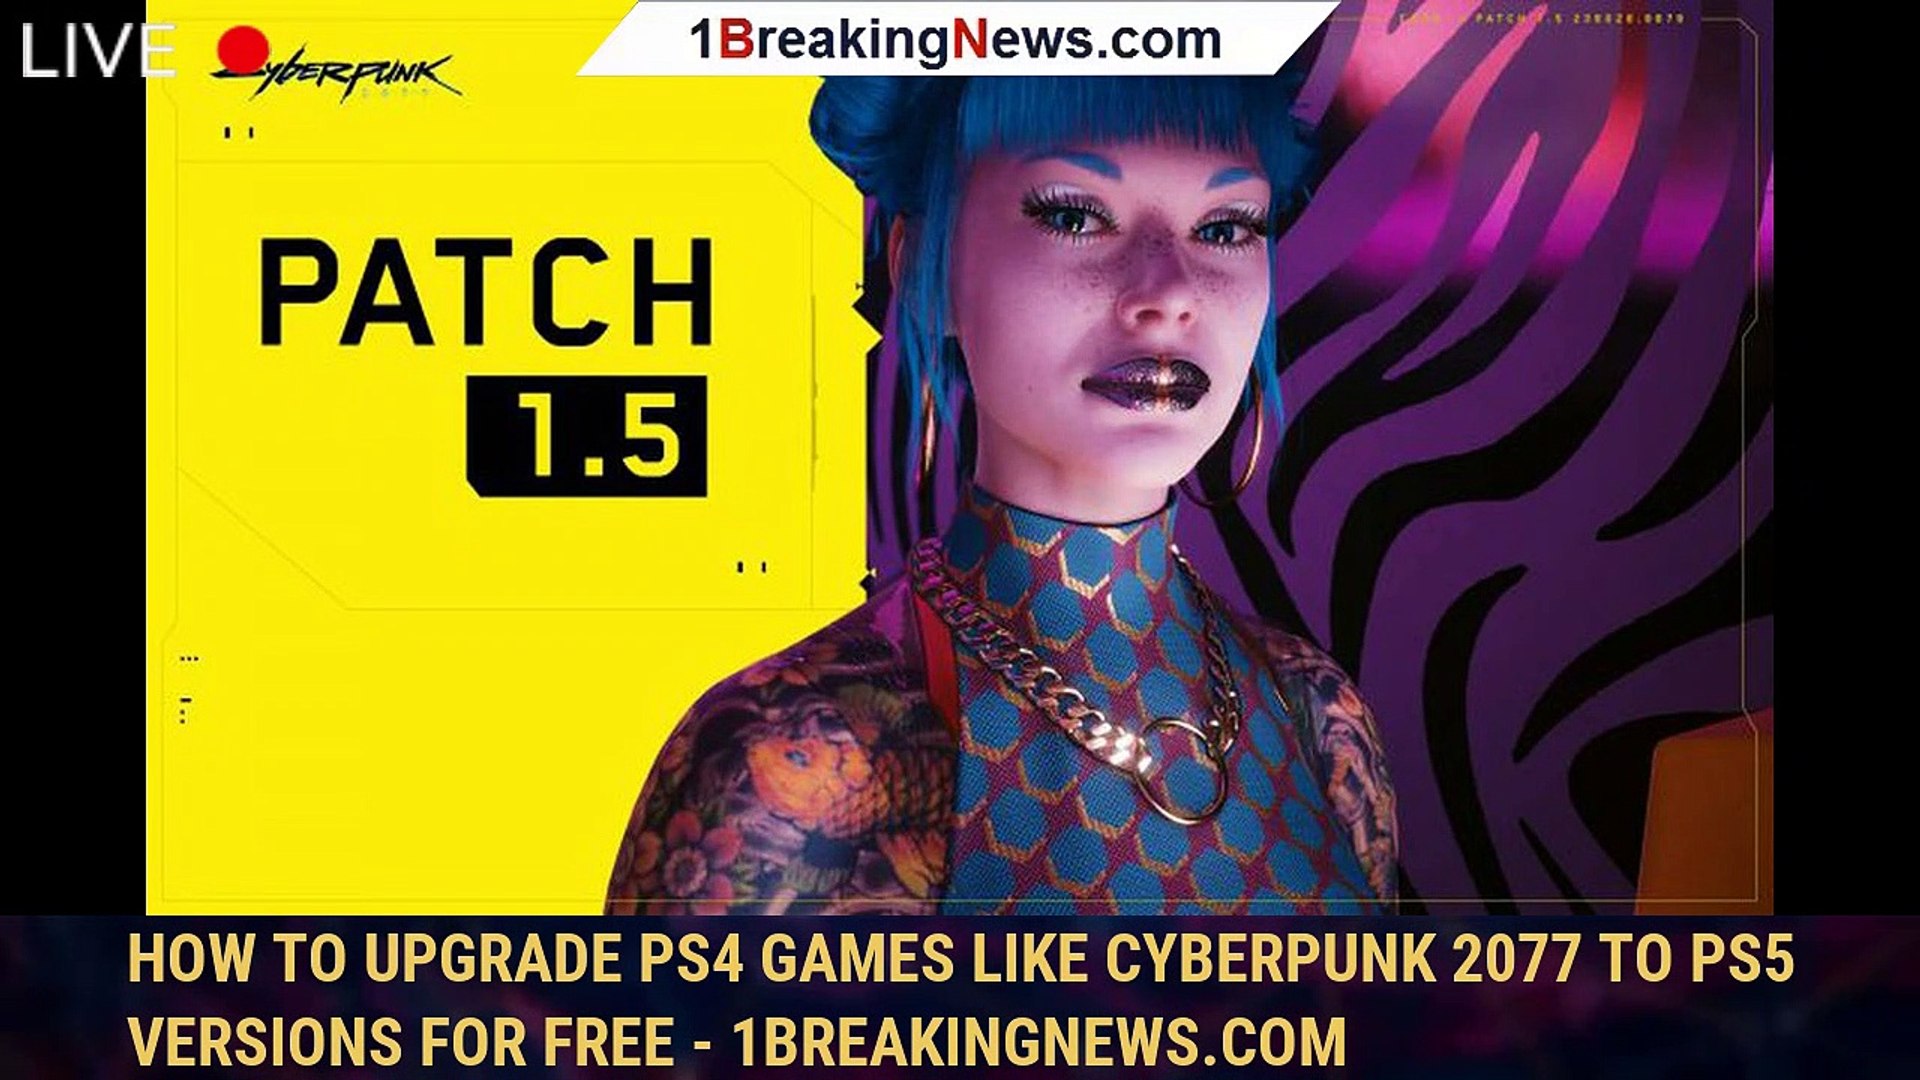 ⁣How to Upgrade PS4 Games Like Cyberpunk 2077 to PS5 Versions For Free - 1BREAKINGNEWS.COM